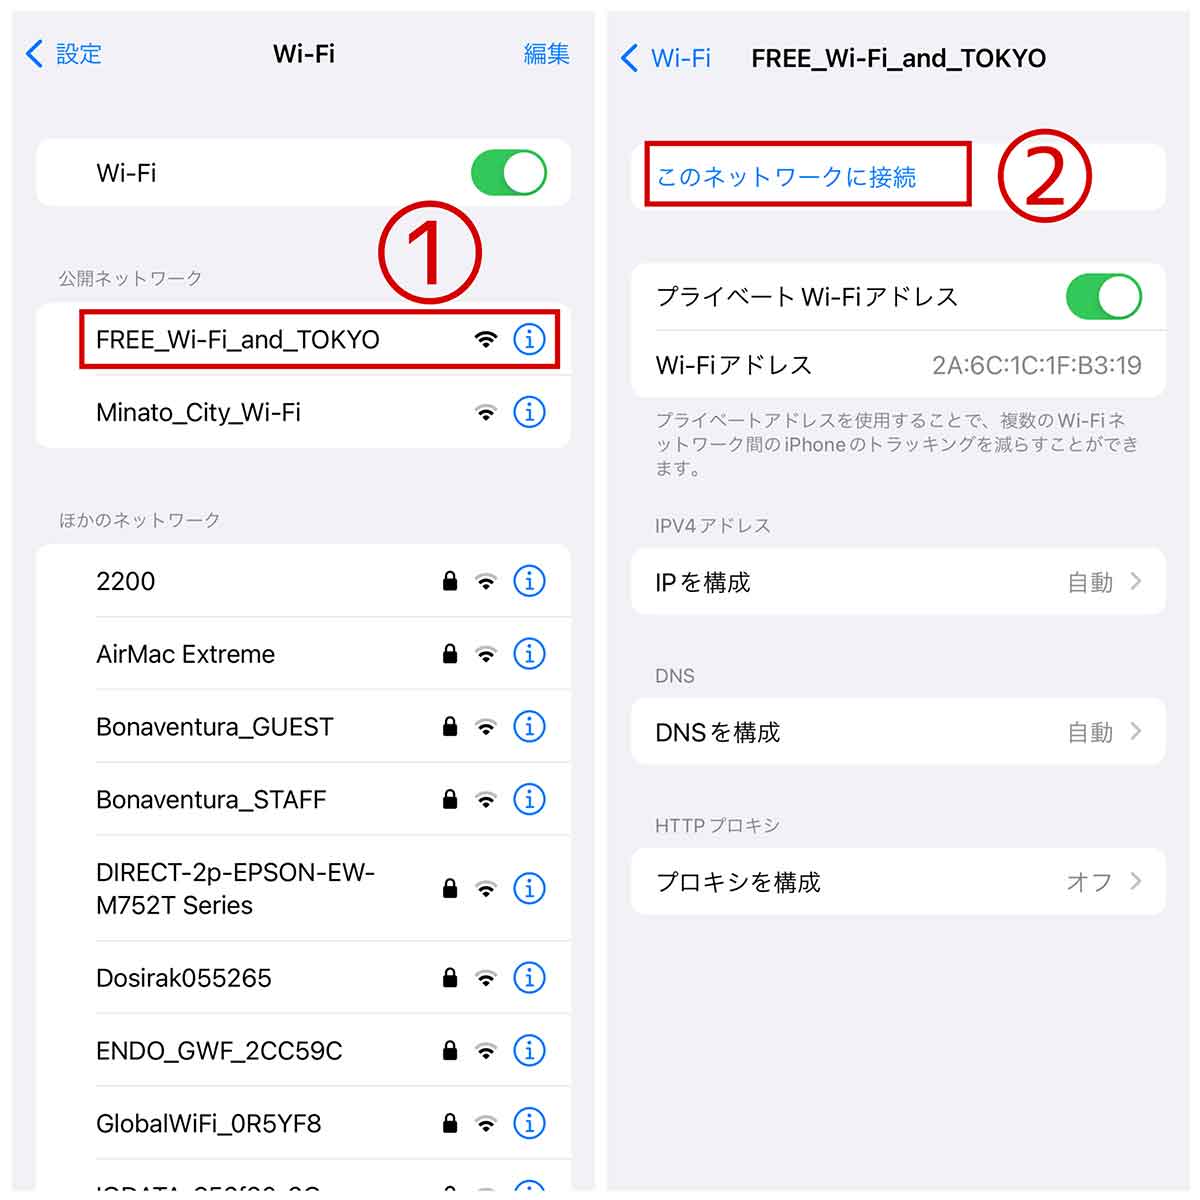 FREE_Wi-Fi_and_TOKYO1